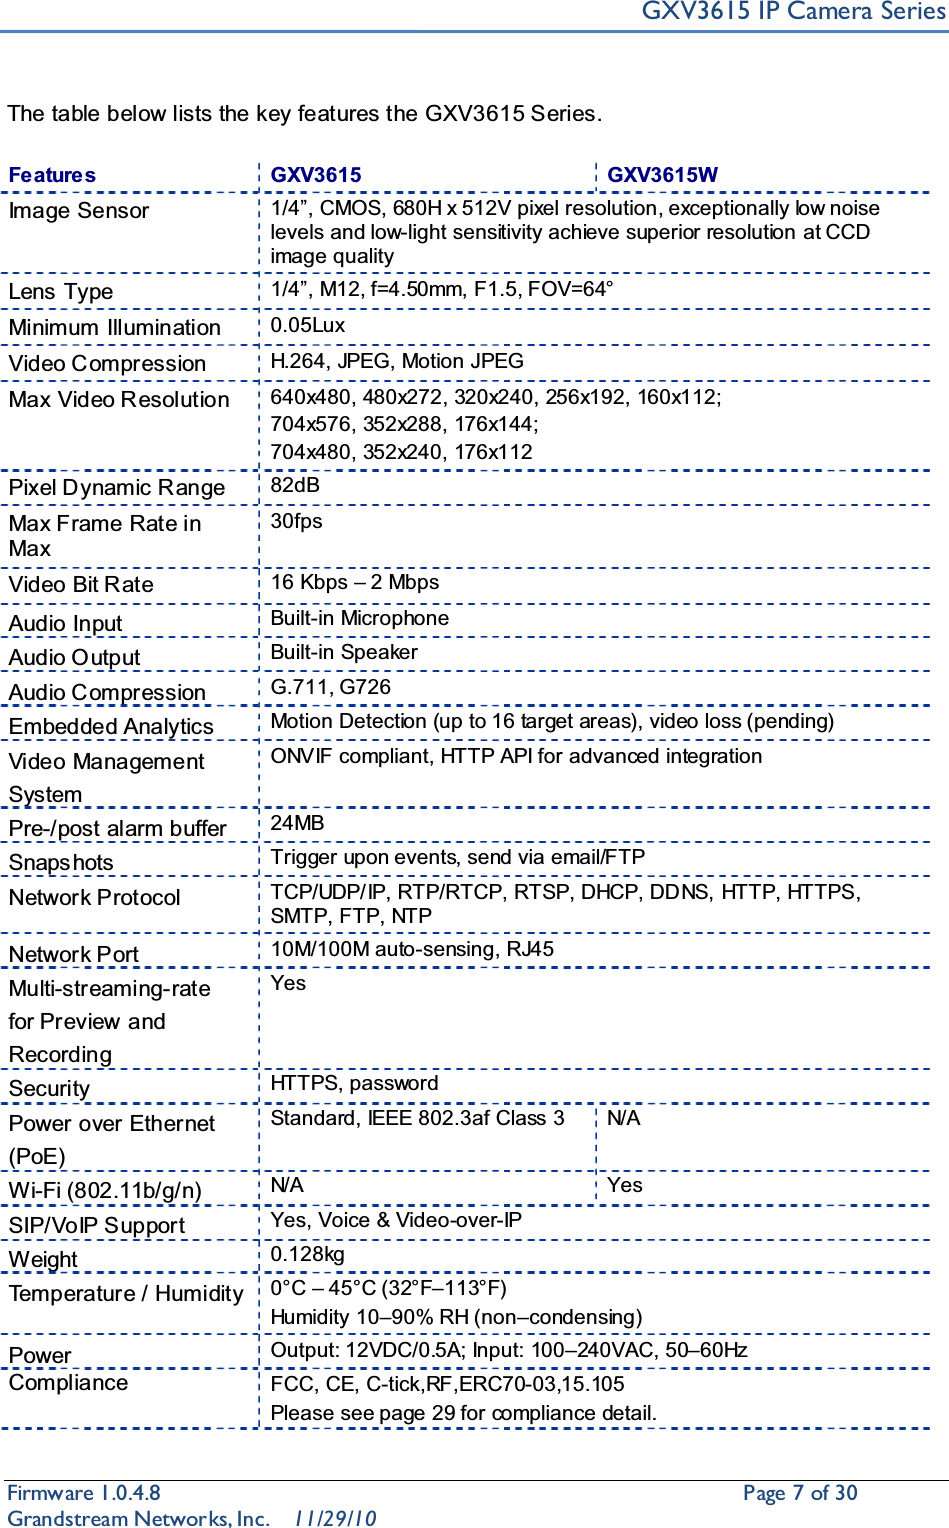 GXV3615 IP Camera SeriesFirmware 1.0.4.8                                                  Page7of 30    Grandstream Networks, Inc. 11/29/10The table below lists the key features the GXV3615 Series.Features GXV3615 GXV3615WImage Sensor 1/4´, CMOS, 680H x 512V pixel resolution, exceptionally low noise levels and low-light sensitivity achieve superior resolution at CCDimage qualityLens Type 1/4´, M12, f=4.50mm, F1.5, FOV=64°Minimum Illumination 0.05LuxVideo Compression H.264, JPEG, Motion JPEGMax Video Resolution 640x480, 480x272, 320x240, 256x192, 160x112;704x576, 352x288, 176x144;704x480, 352x240, 176x112Pixel Dynamic R ange 82dBMax Frame Rate in Max30fpsVideo Bit Rate 16 Kbps ±2 MbpsAudio Input Built-in MicrophoneAudio Output Built-in SpeakerAudio Compression G.711, G726Embedded Analytics Motion Detection (up to 16 target areas), video loss (pending)Video Management SystemONVIF compliant, HTTP API for advanced integrationPre-/post alarm buffer 24MBSnaps hots Trigger upon events, send via email/FTPNetwork Protocol  TCP/UDP/IP, RTP/RTCP, RTSP, DHCP, DDNS, HTTP, HTTPS,SMTP, FTP, NTPNetwork Port 10M/100M auto-sensing, RJ45Multi-streaming-ratefor Preview and RecordingYesSecurity HTTPS, passwordPower over Ethernet (PoE)Standard, IEEE 802.3af Class 3 N/AWi-Fi (802.11b/g/n) N/A YesSIP/VoIP Support Yes, Voice &amp; Video-over-IPWeight 0.128kgTemperature / Humidity 0°C ±45°C (32°F±113°F)Humid ity 10±90% RH (non±condensing)Power Output: 12VDC/0.5A; Input: 100±240VAC, 50±60HzCompliance FCC, CE, C-tick,RF,ERC70-03,15.105Please see page 29 for compliance detail.